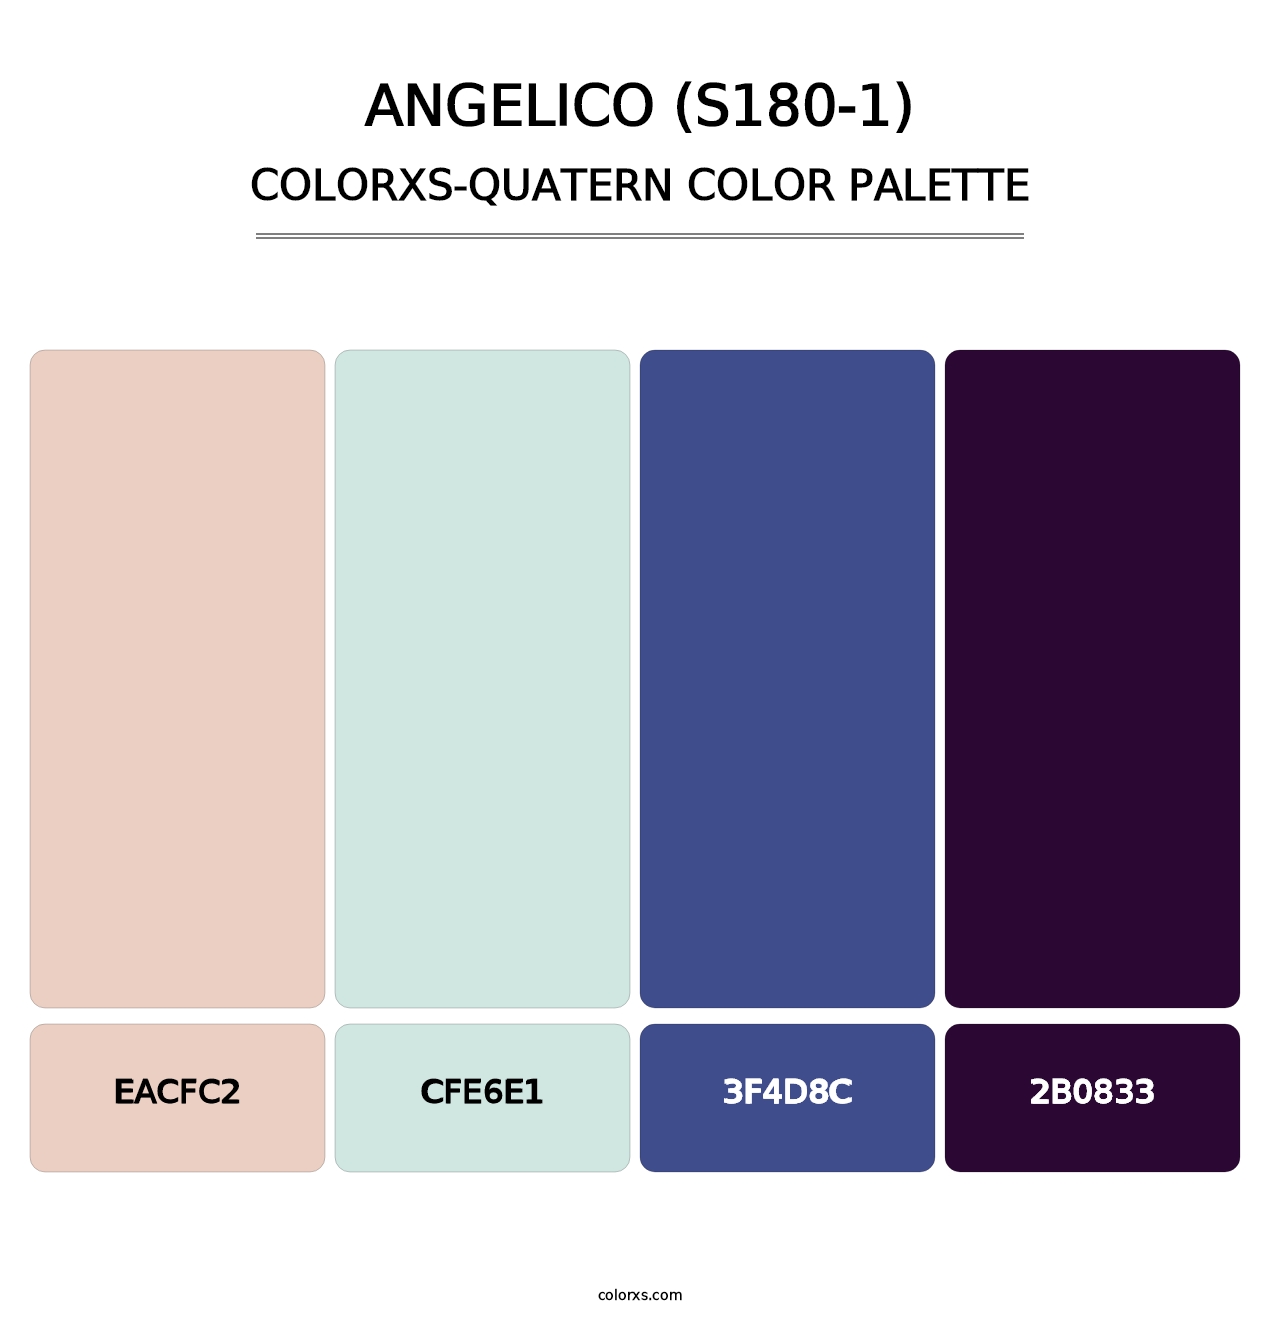 Angelico (S180-1) - Colorxs Quatern Palette